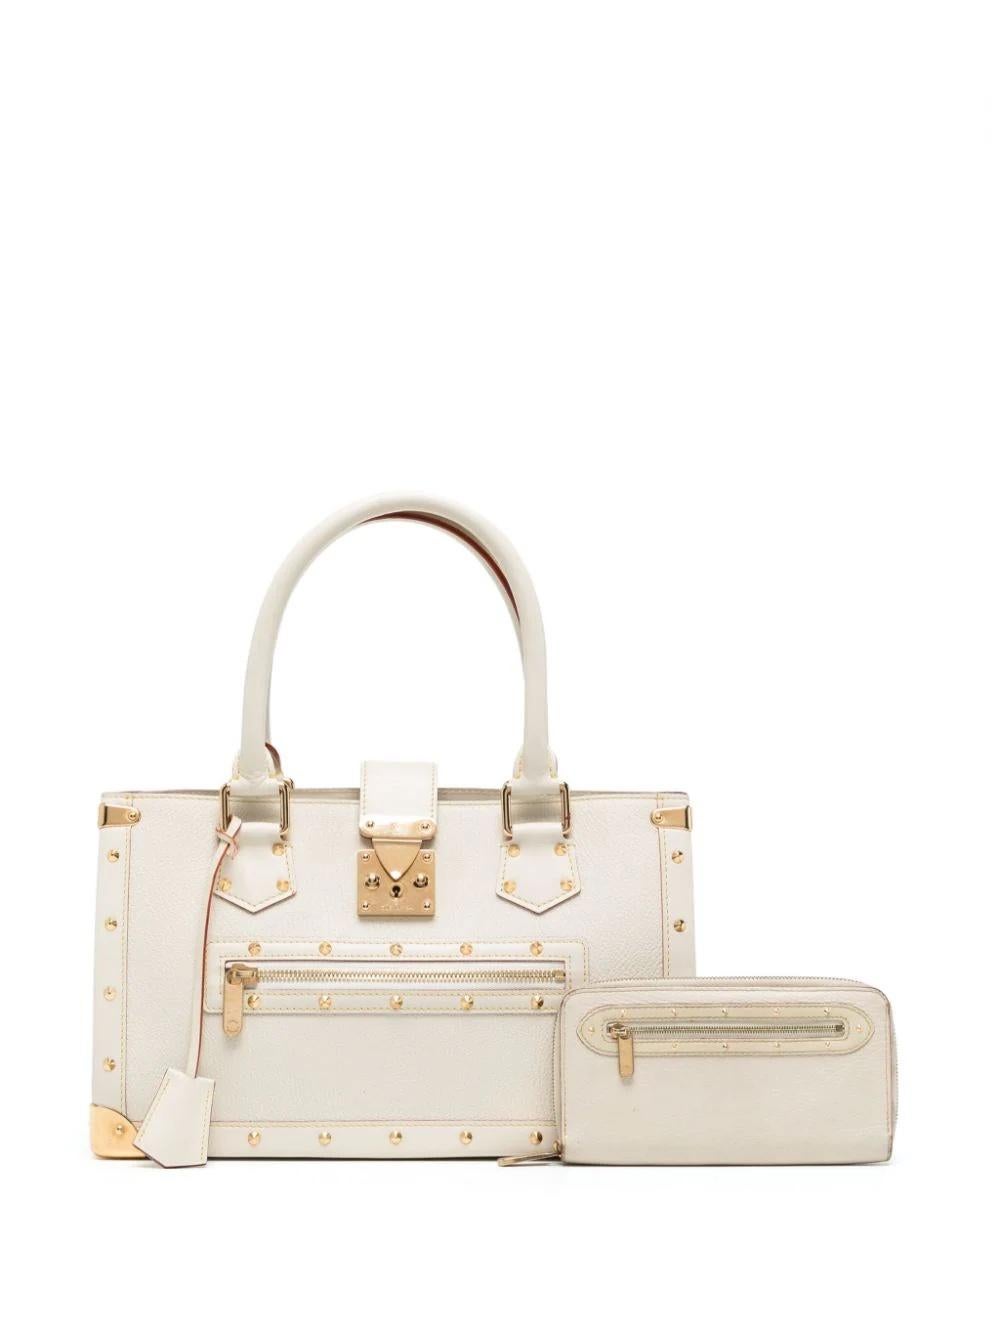 * White calf leather
* Clochette
* Gold-tone stud detailing
* Two rolled top handles
* Clasp fastening
* Partitioned compartment
* Removable matching wallet
* Multiple internal slip pockets
* Very Good Condition: This pre-loved item does show minor